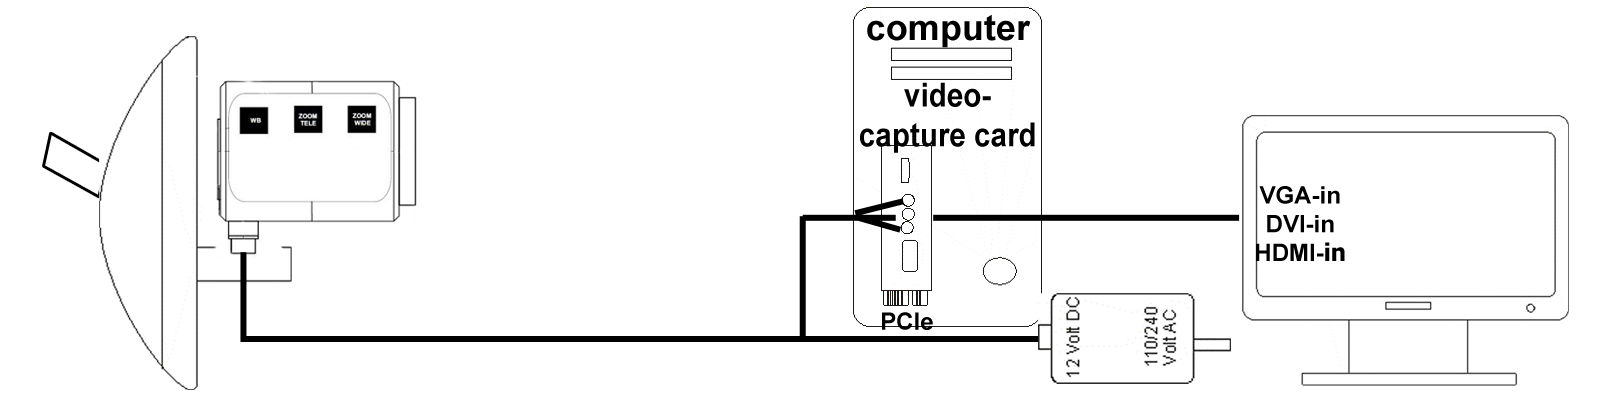 diagram thirdeye hd with computer and capture card